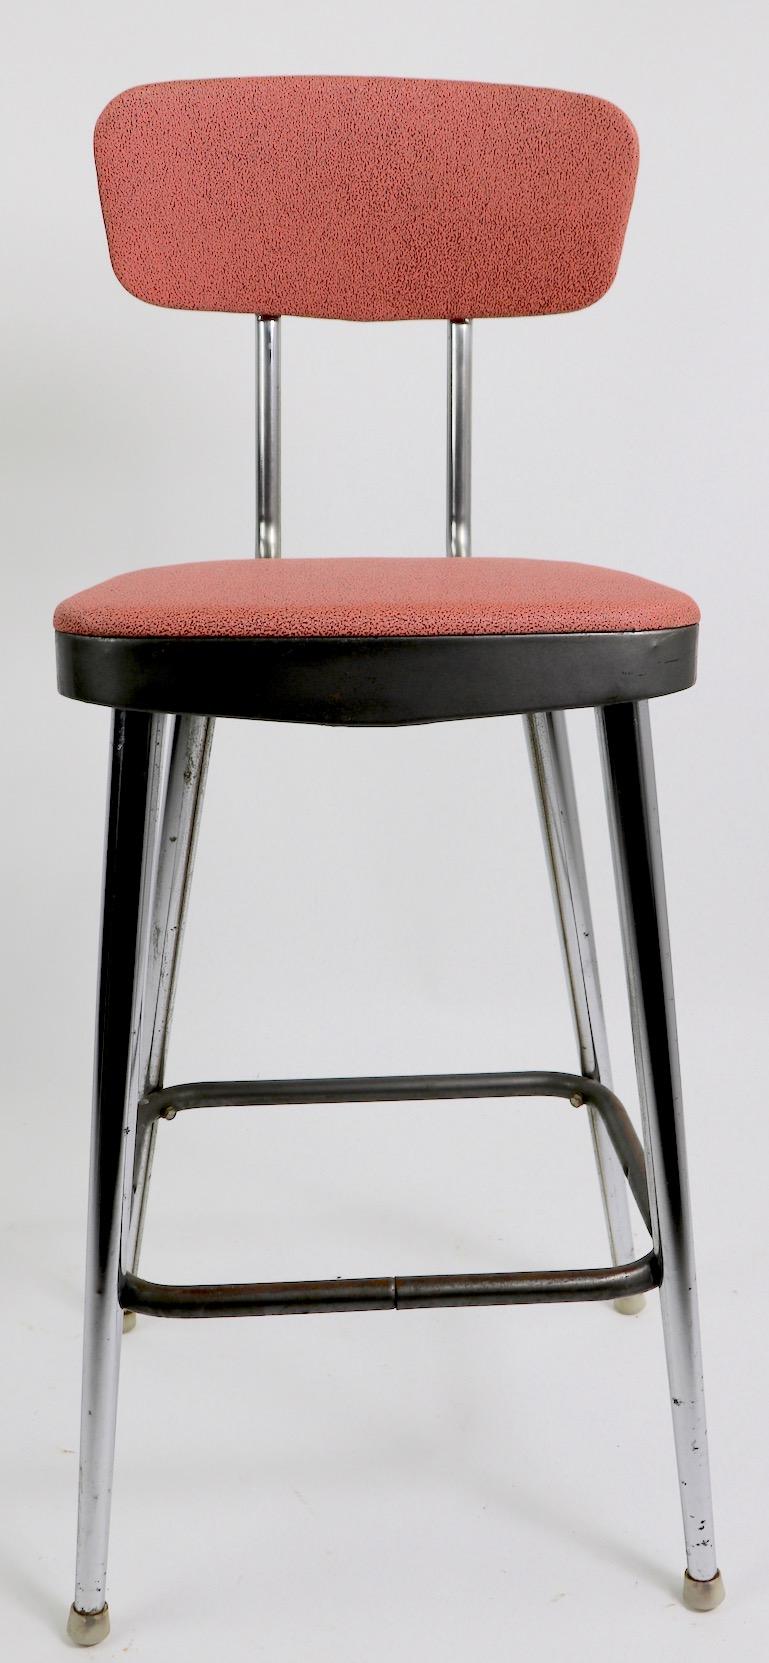 Classic American MCM chrome and rose pink vinyl counter height stools, attributed to Cosco Mfg. Each backrest pad tilts to support your back, and each is adjustable in height as well, to customize to your position. Both stools are in very good,